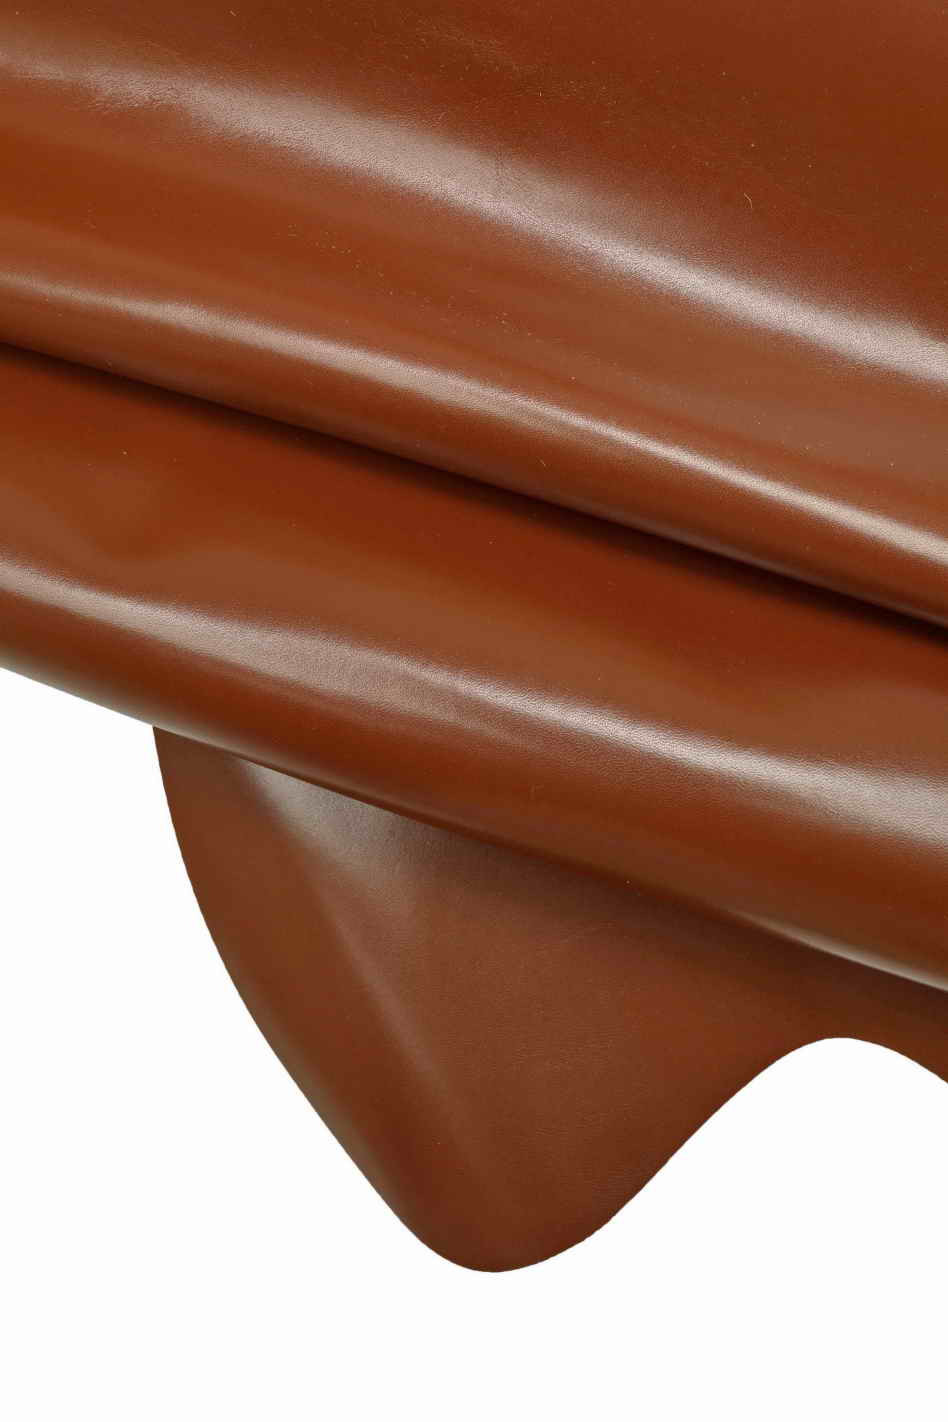 Full Grain cowhide leather strips for crafts